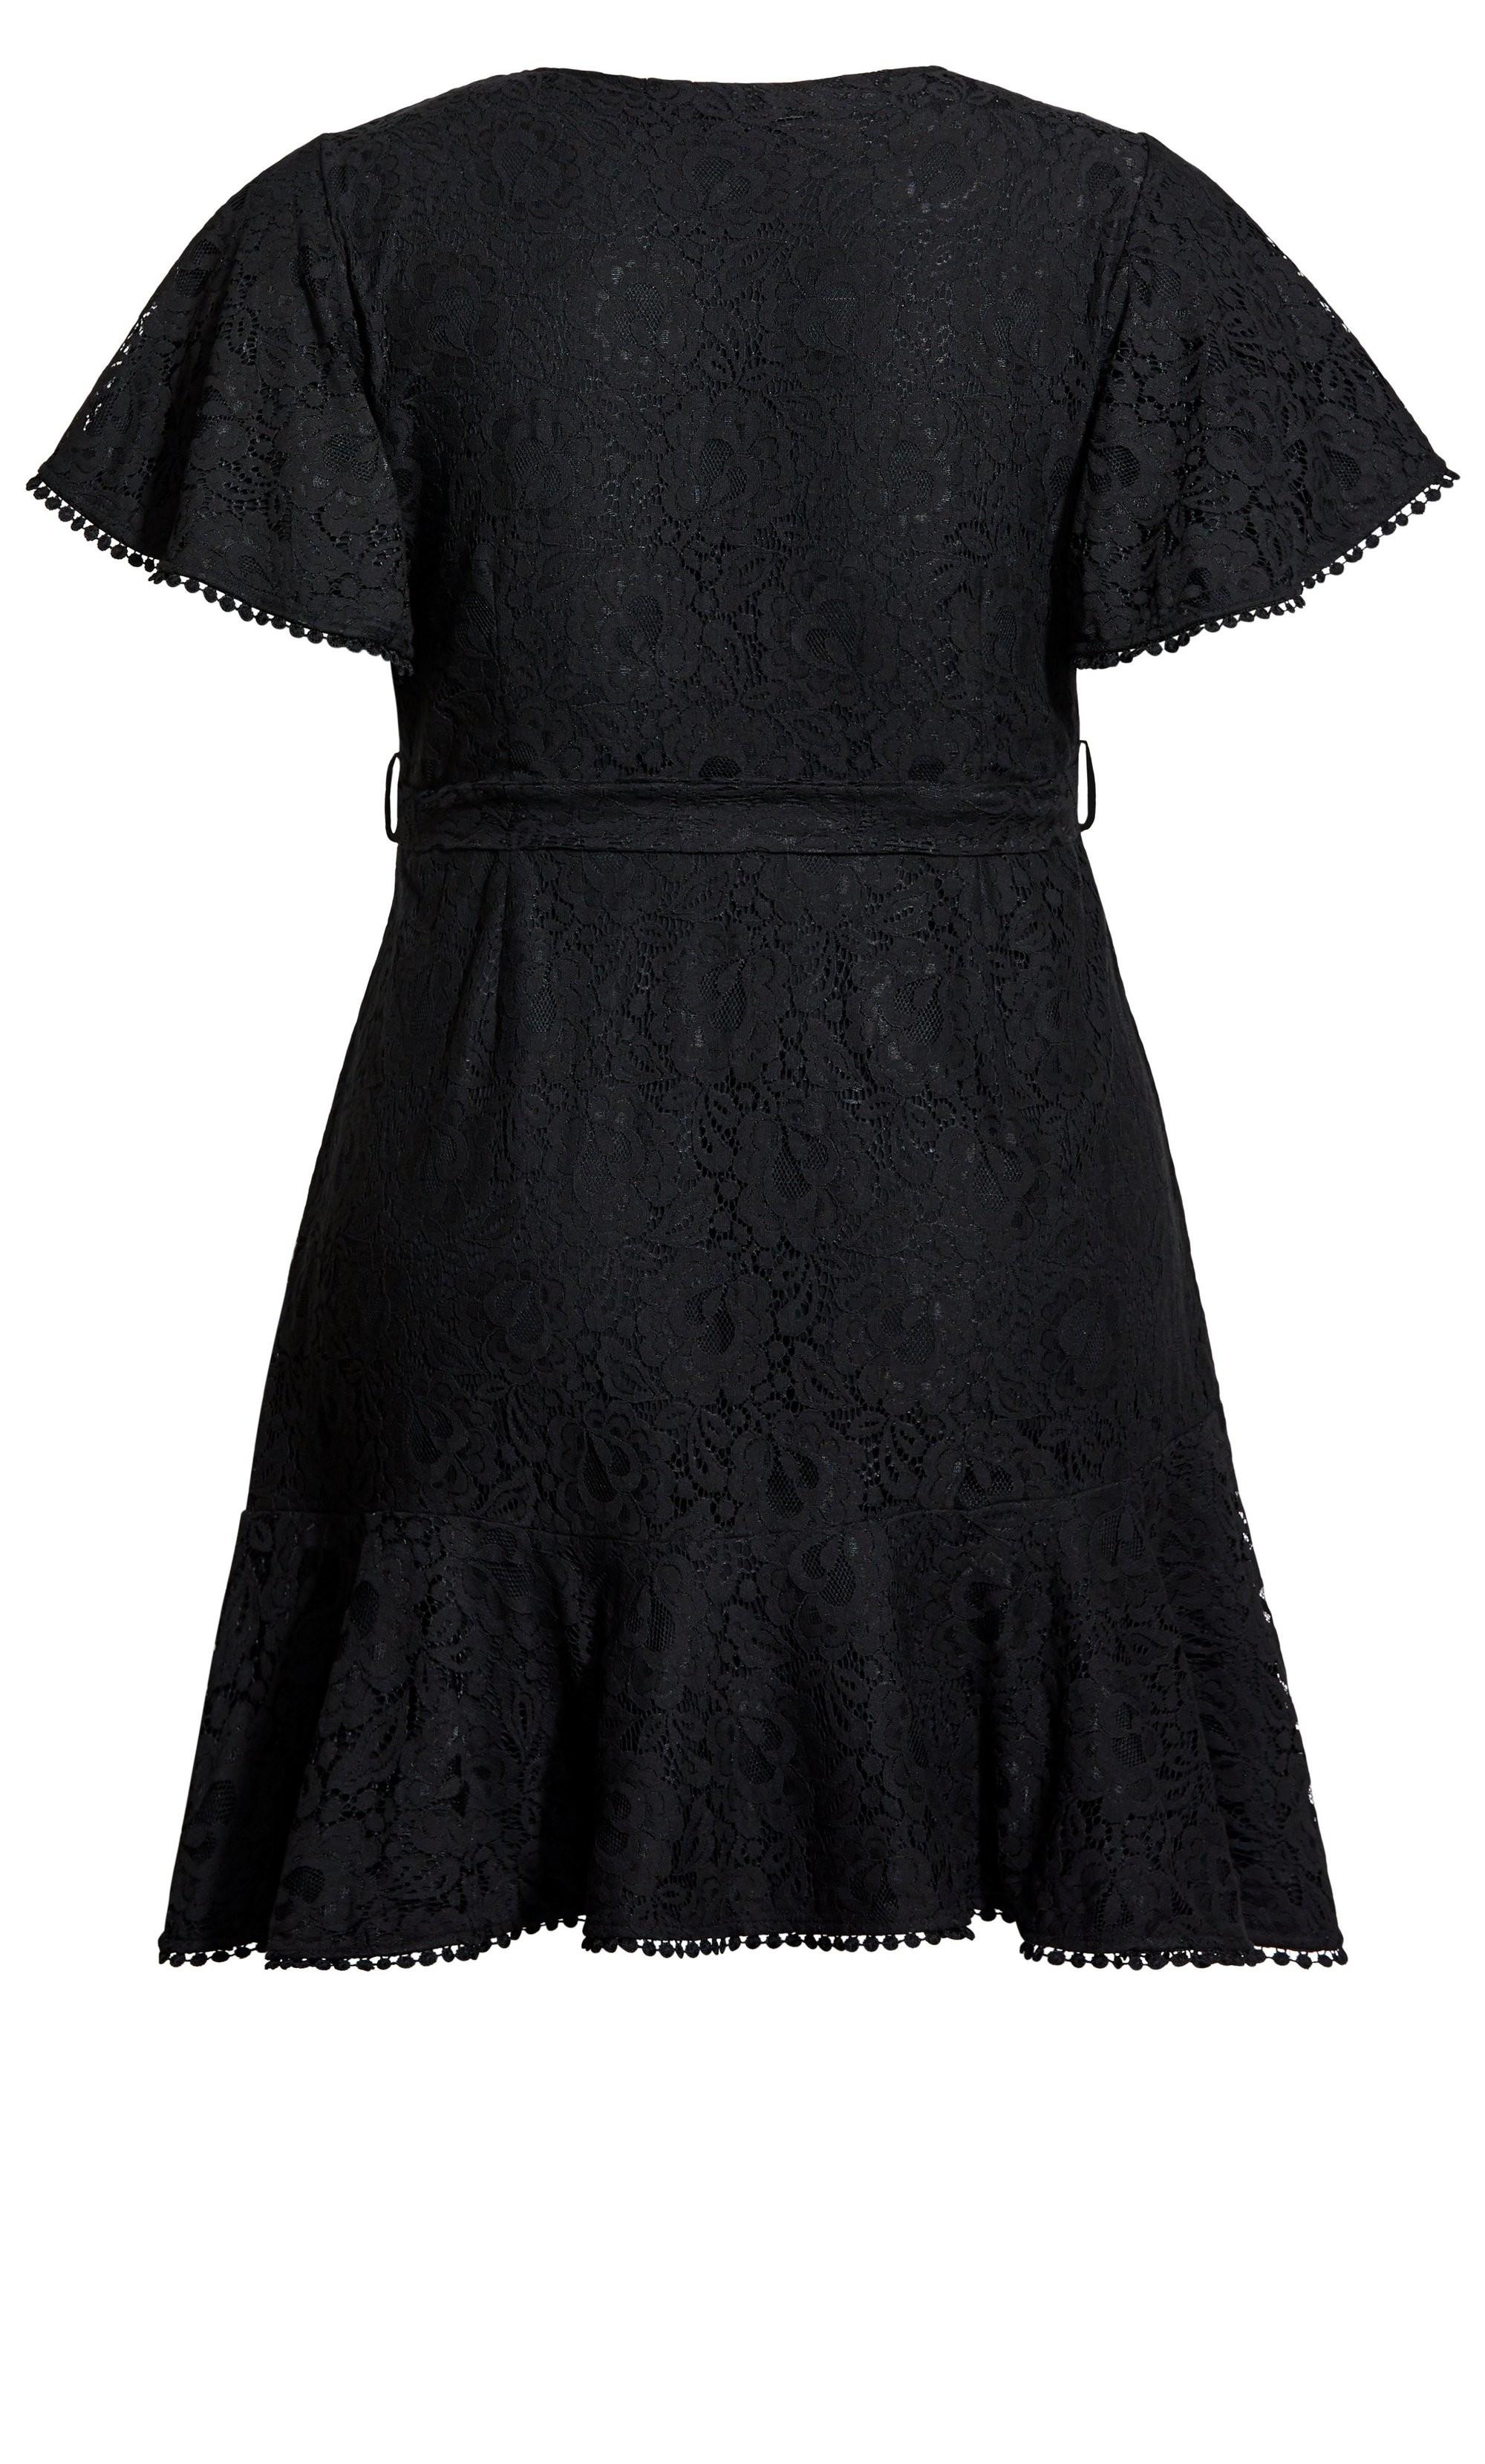 City Chic Sweet Love Lace Dress in Black - Lyst